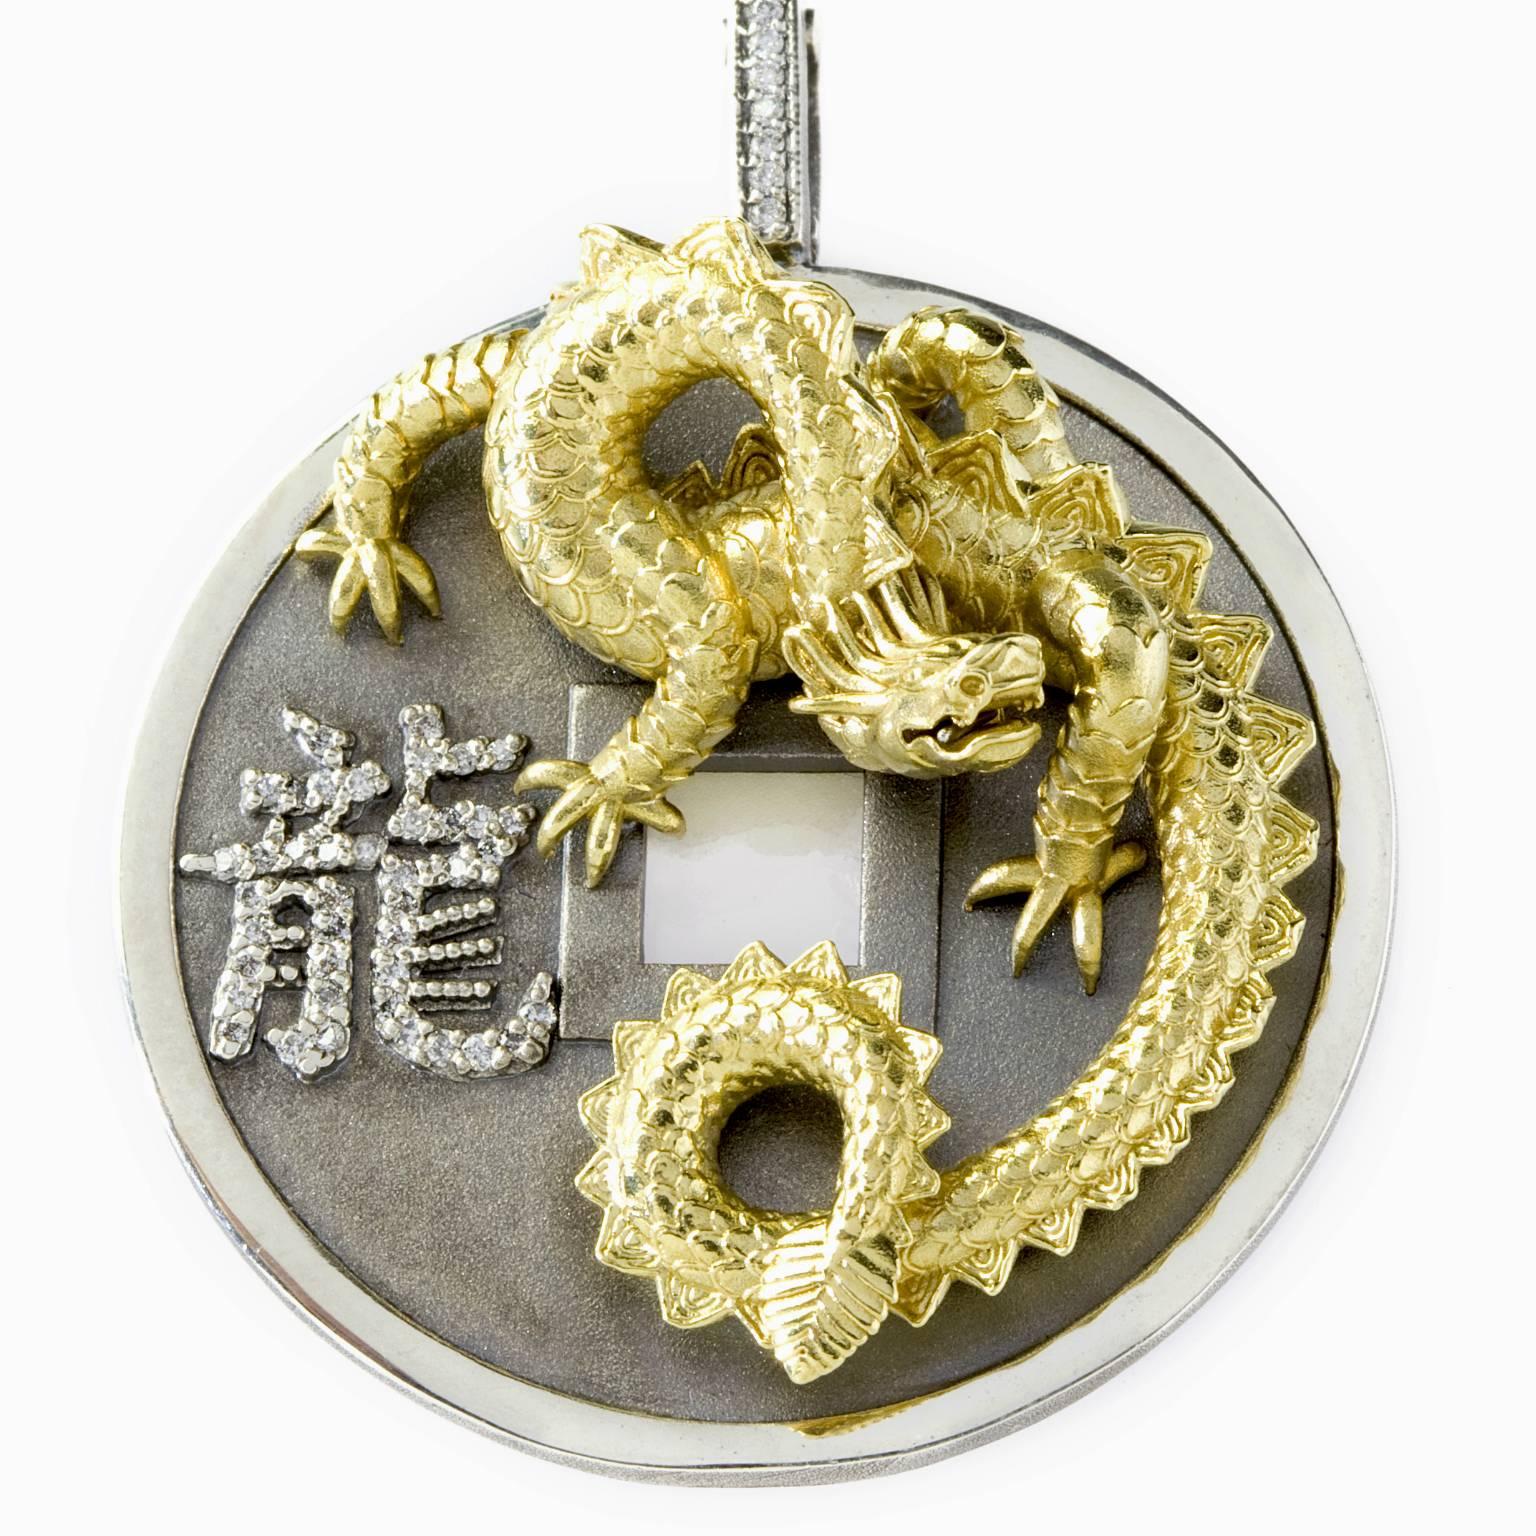 Aged Silver and 18K Gold Dragon Pendant Necklace by Stambolian

The necklace comes with a Stambolian 